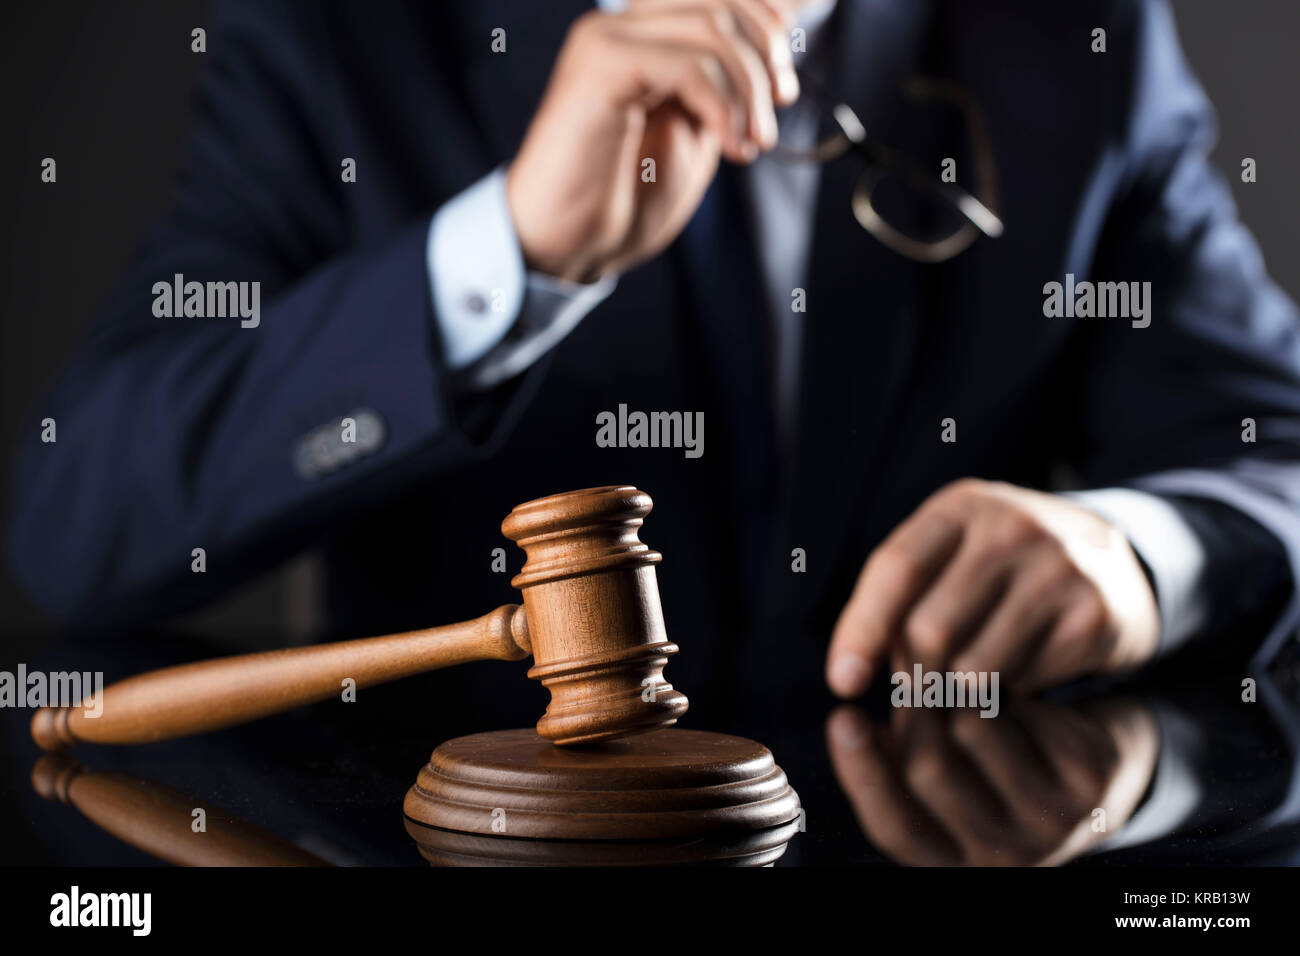 Judge in the courtroom. Gavel on the table. Law and justice theme. Stock Photo